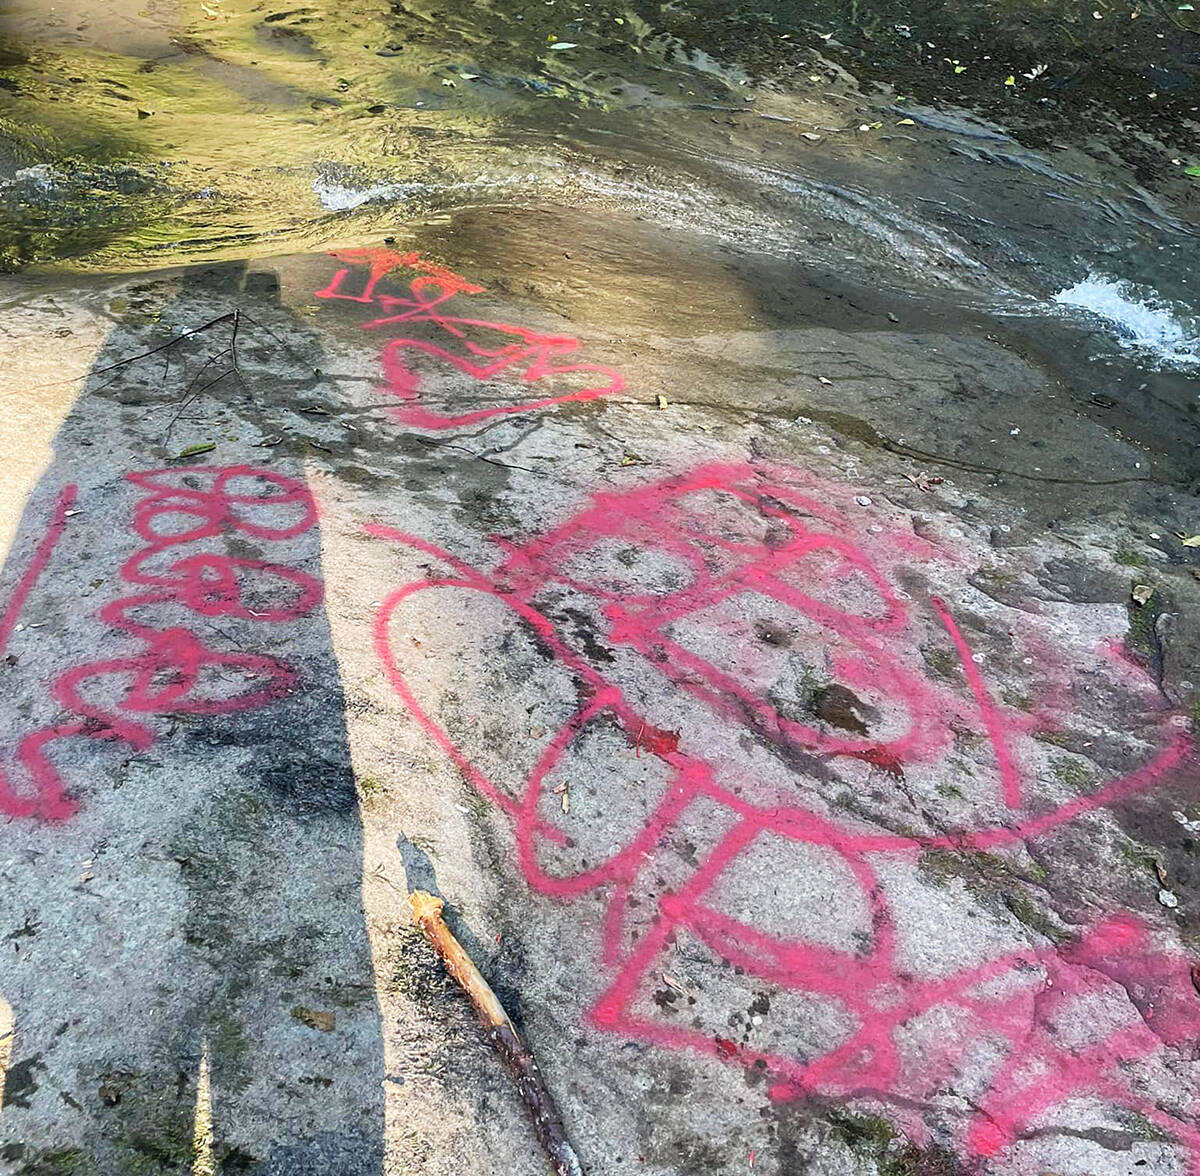 Vandals spray painted Cliff Falls, a popular natural area of Maple Ridge. (Special to The News)